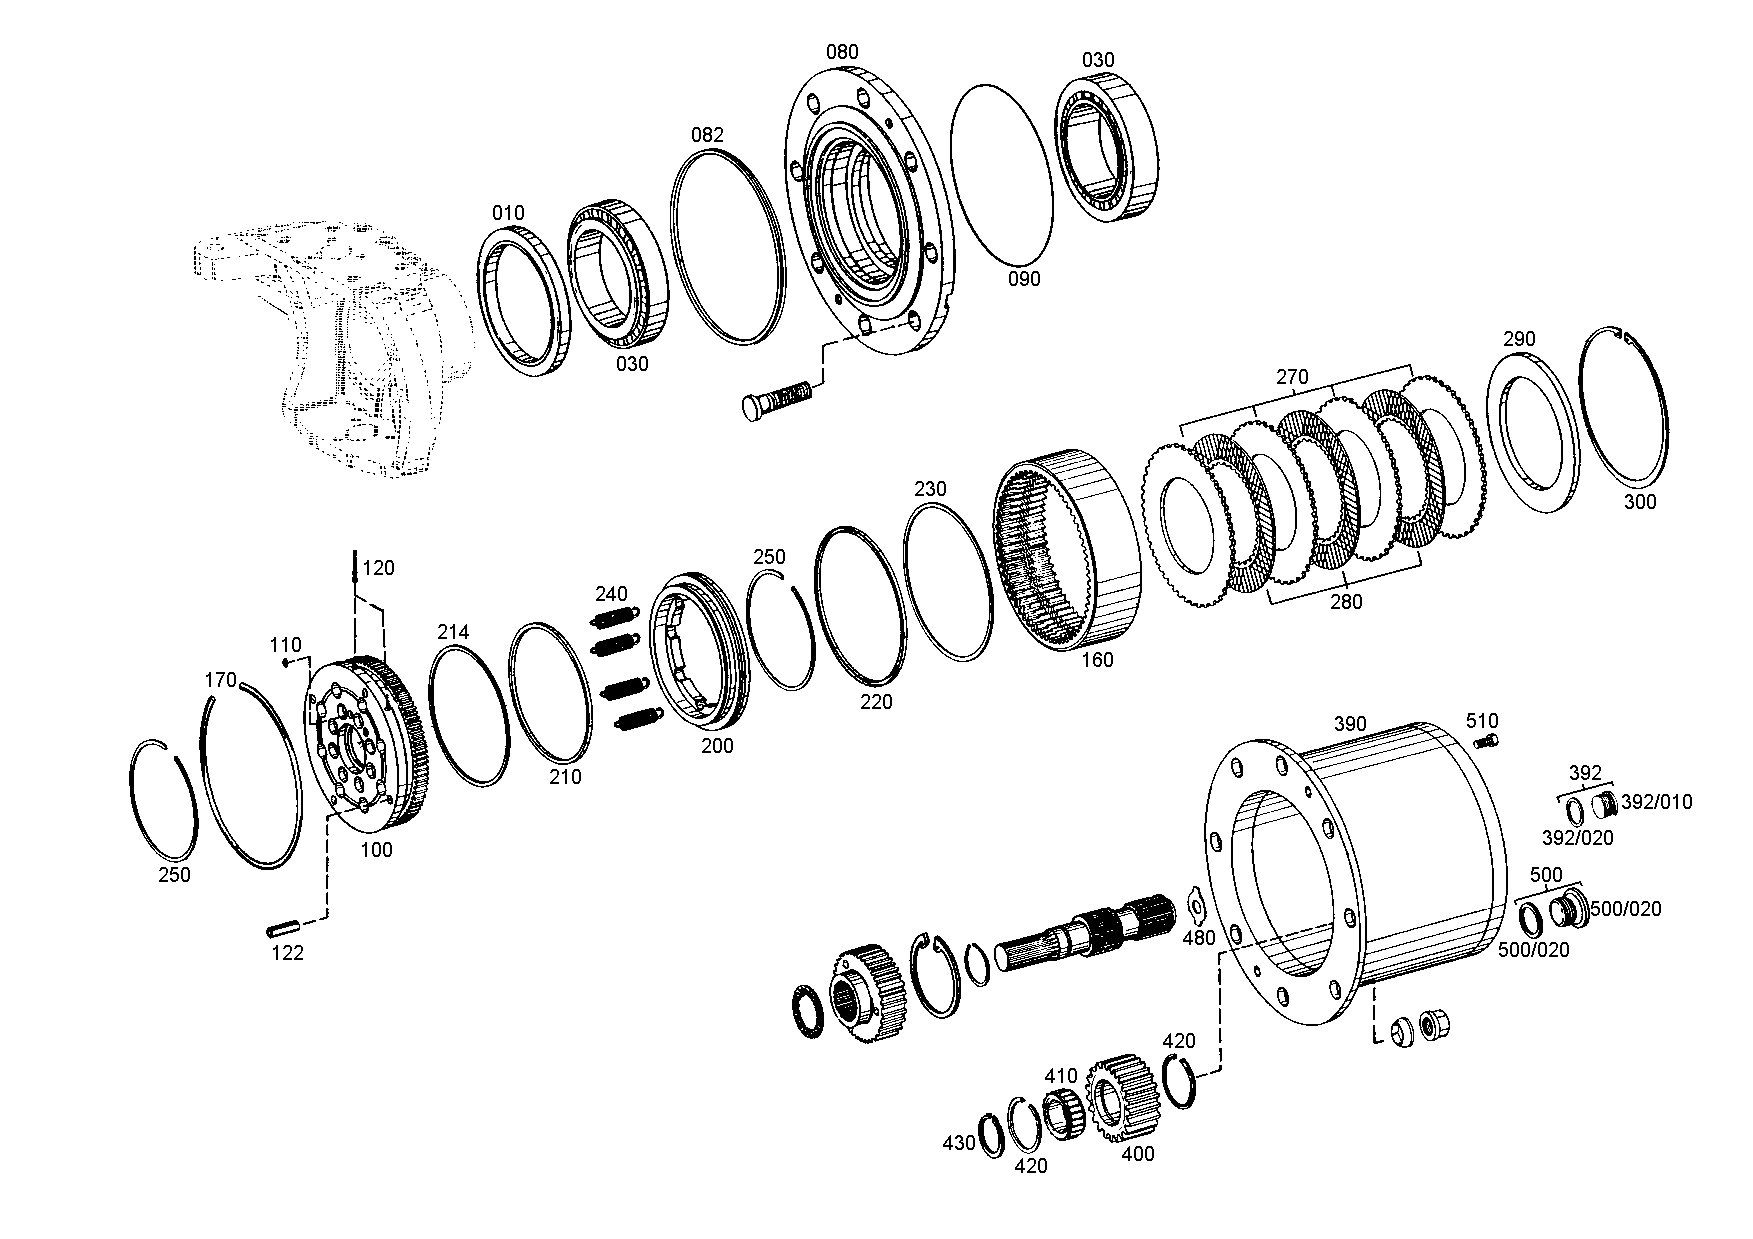 drawing for CATERPILLAR INC. 054-6549 - PLANETARY GEAR (figure 4)